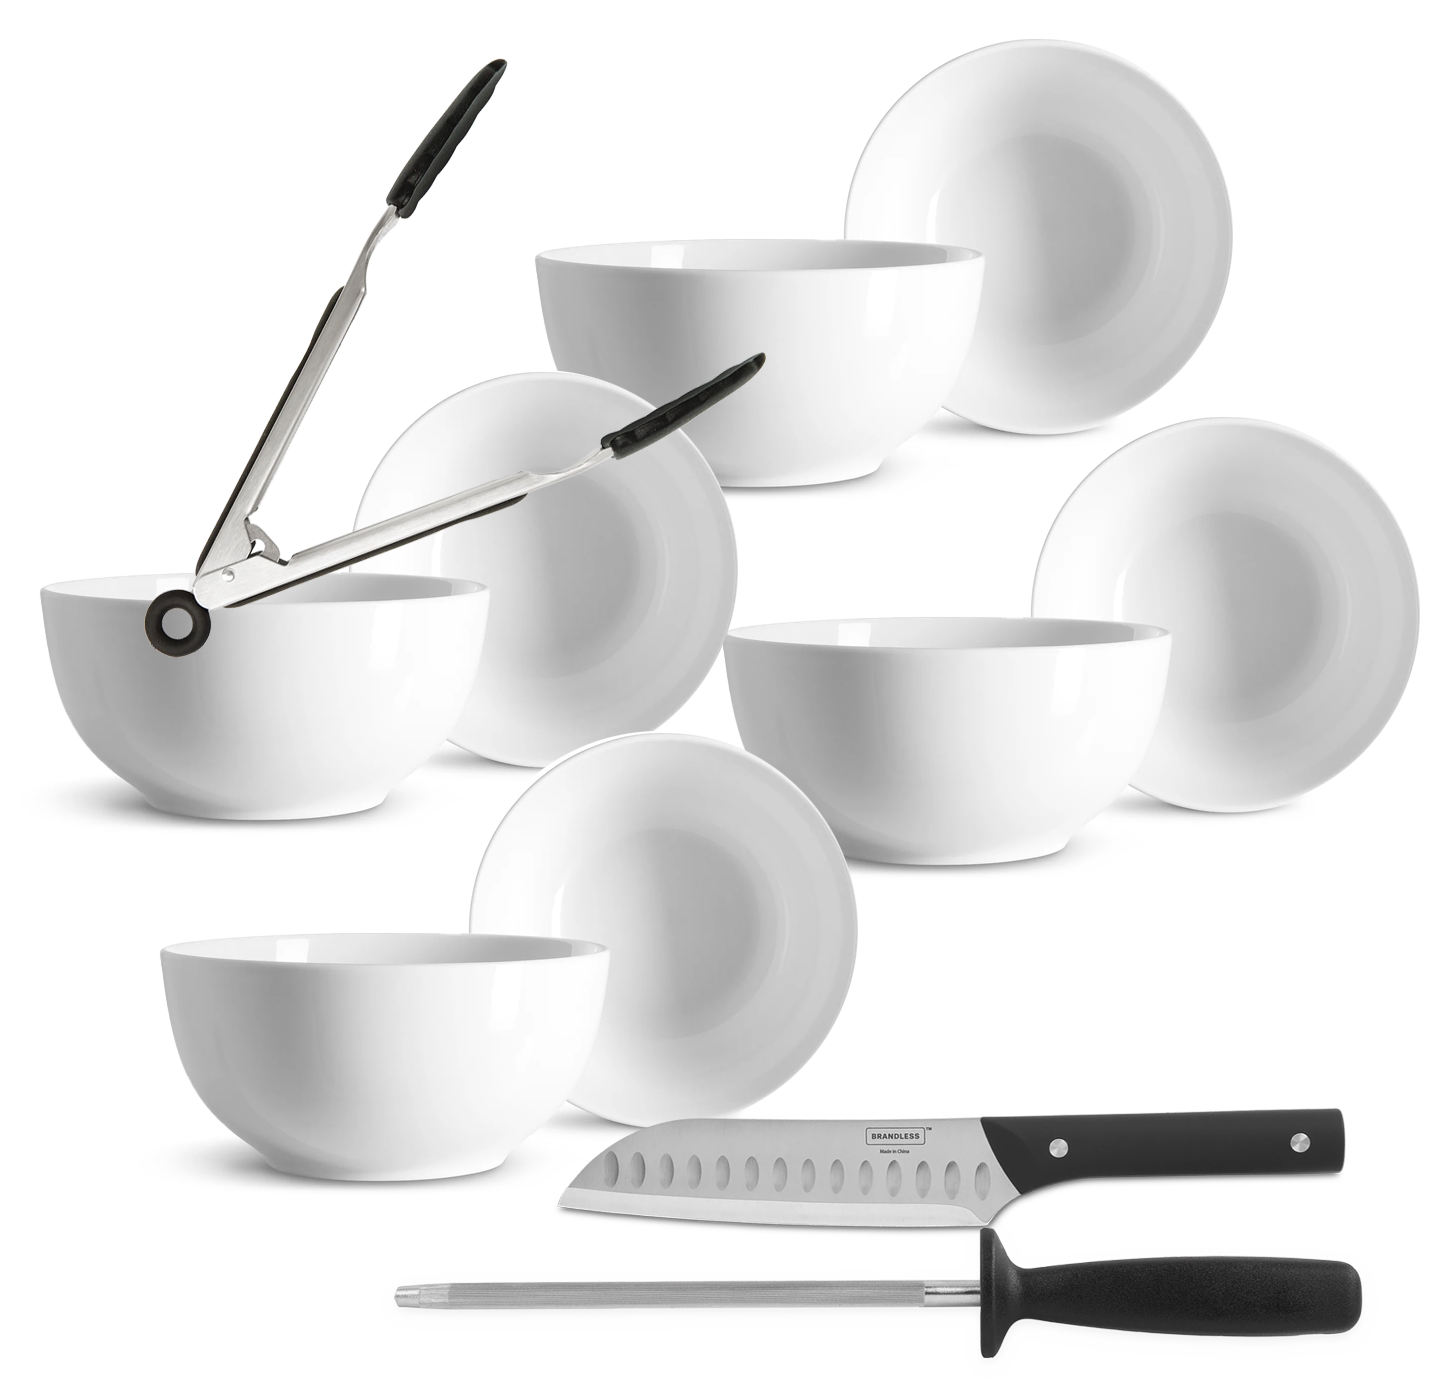 Bundle items, 8 ramen bowls, santoku knife, honing steel, and 9 inch silicone tongs